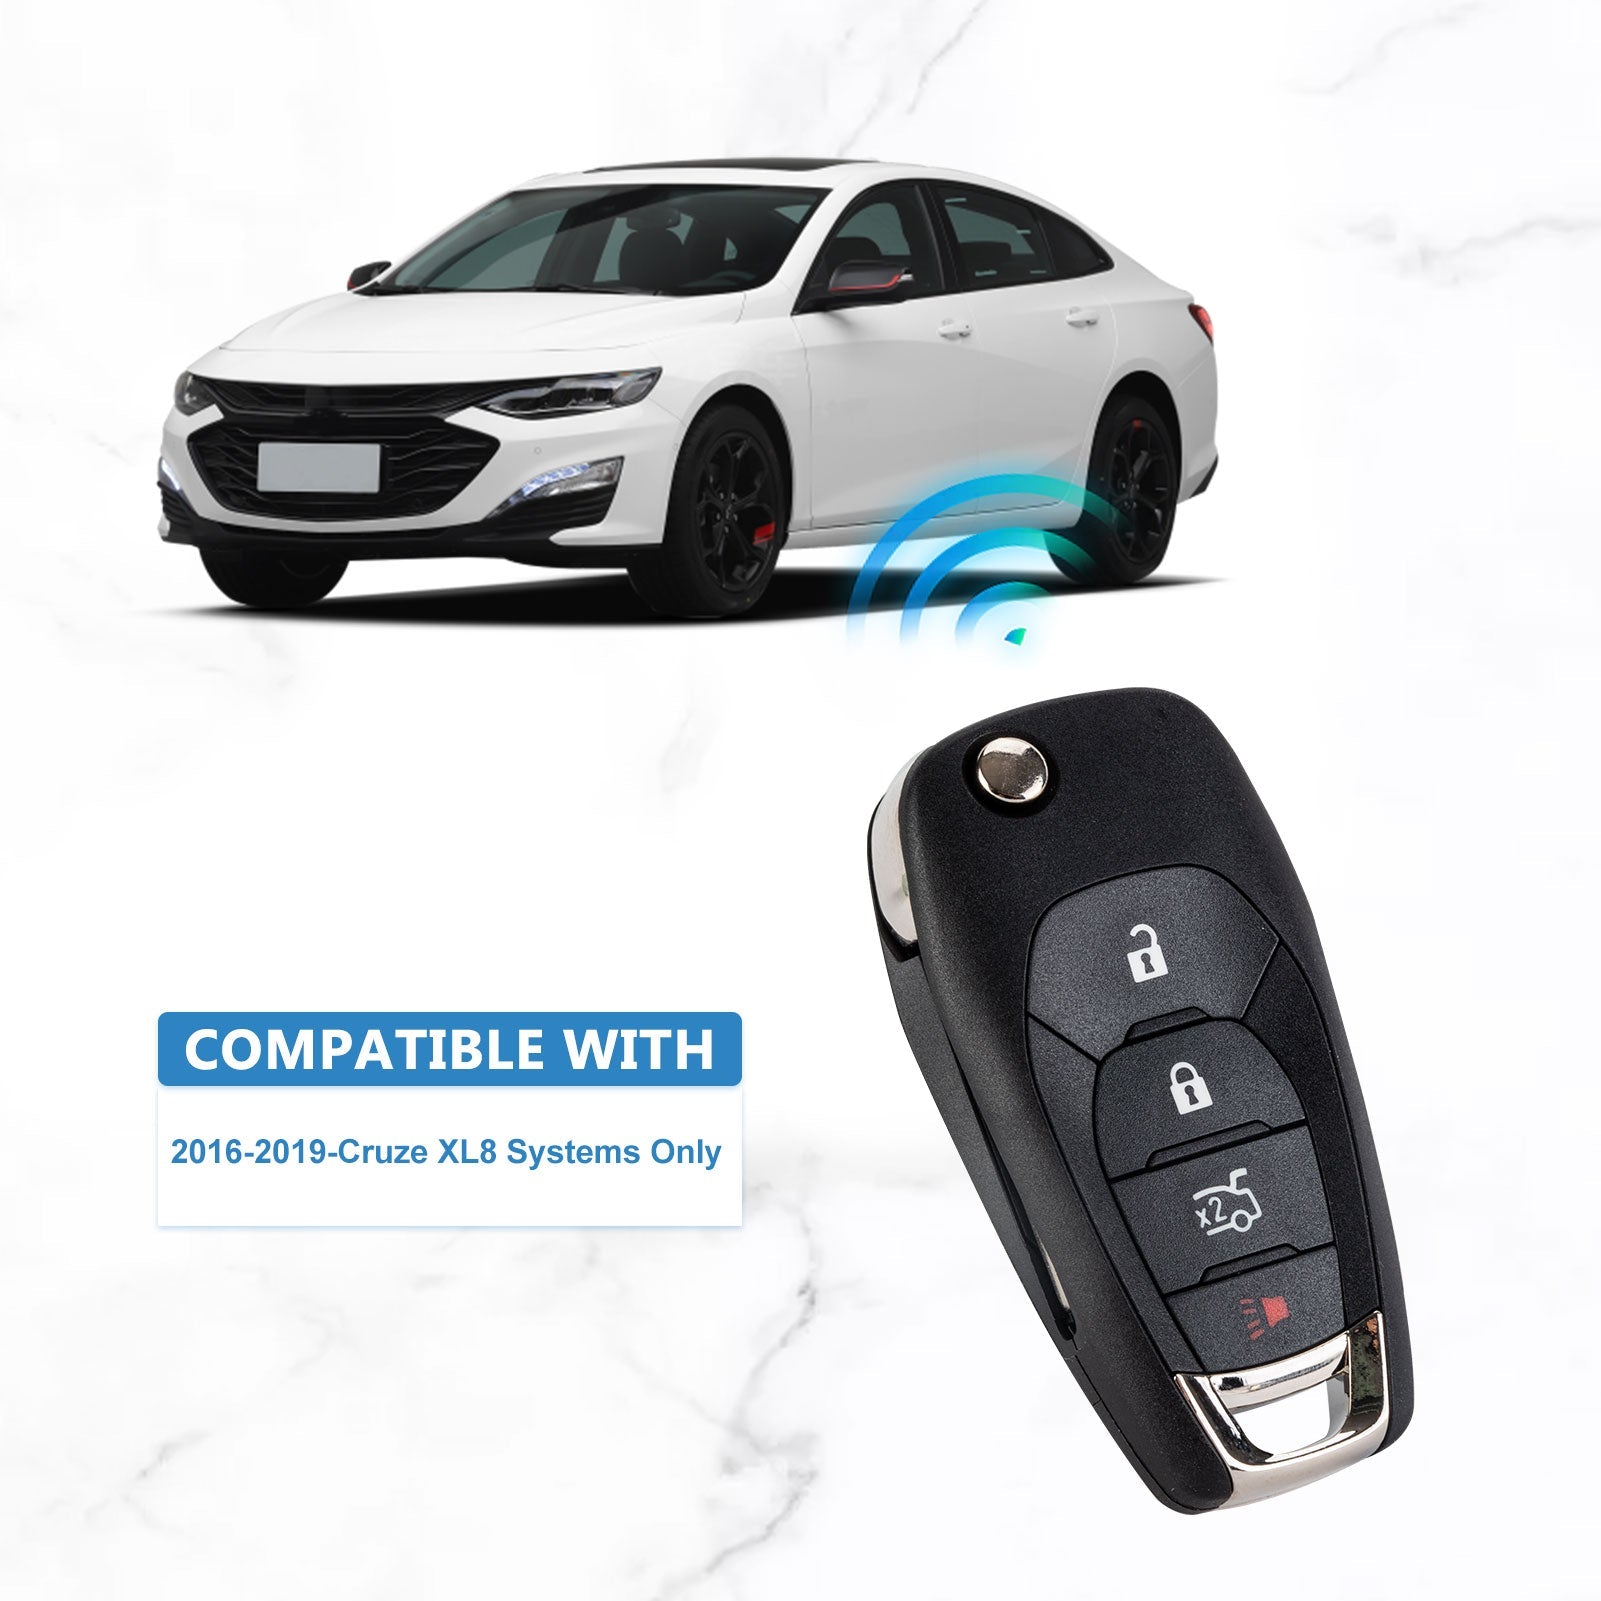 4 BTN Keyless Entry Remote 433MHZ Car Key Replacement for 2016-2019-Cruze XL8 Systems Only LXP-T004  KR-C4SD-05